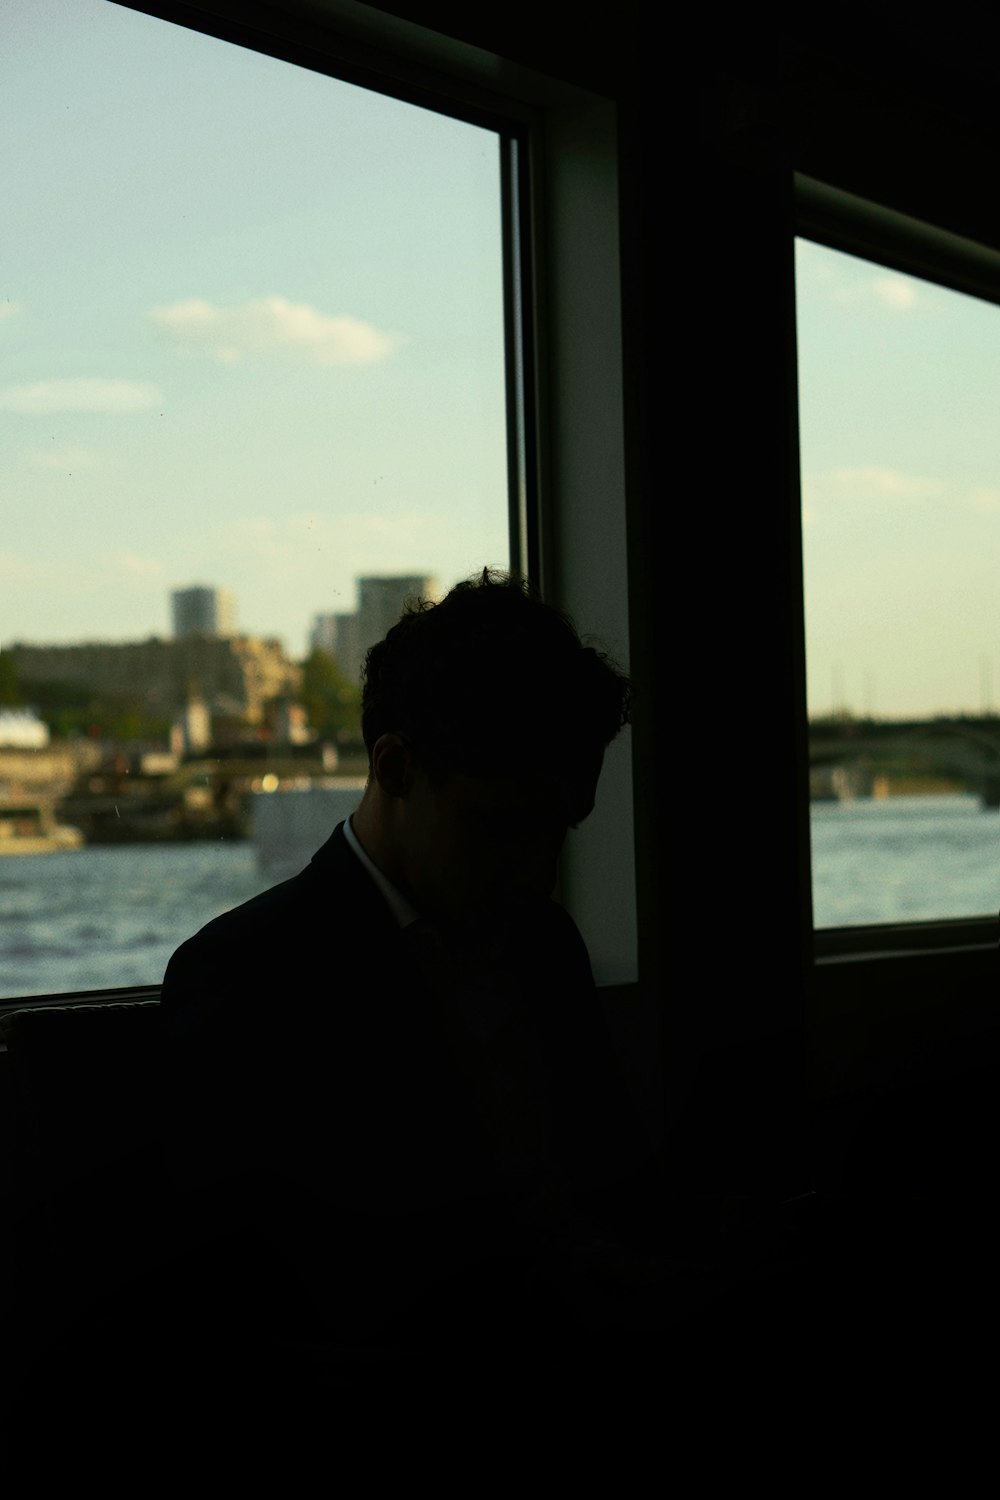 a man looking out of a window at a body of water